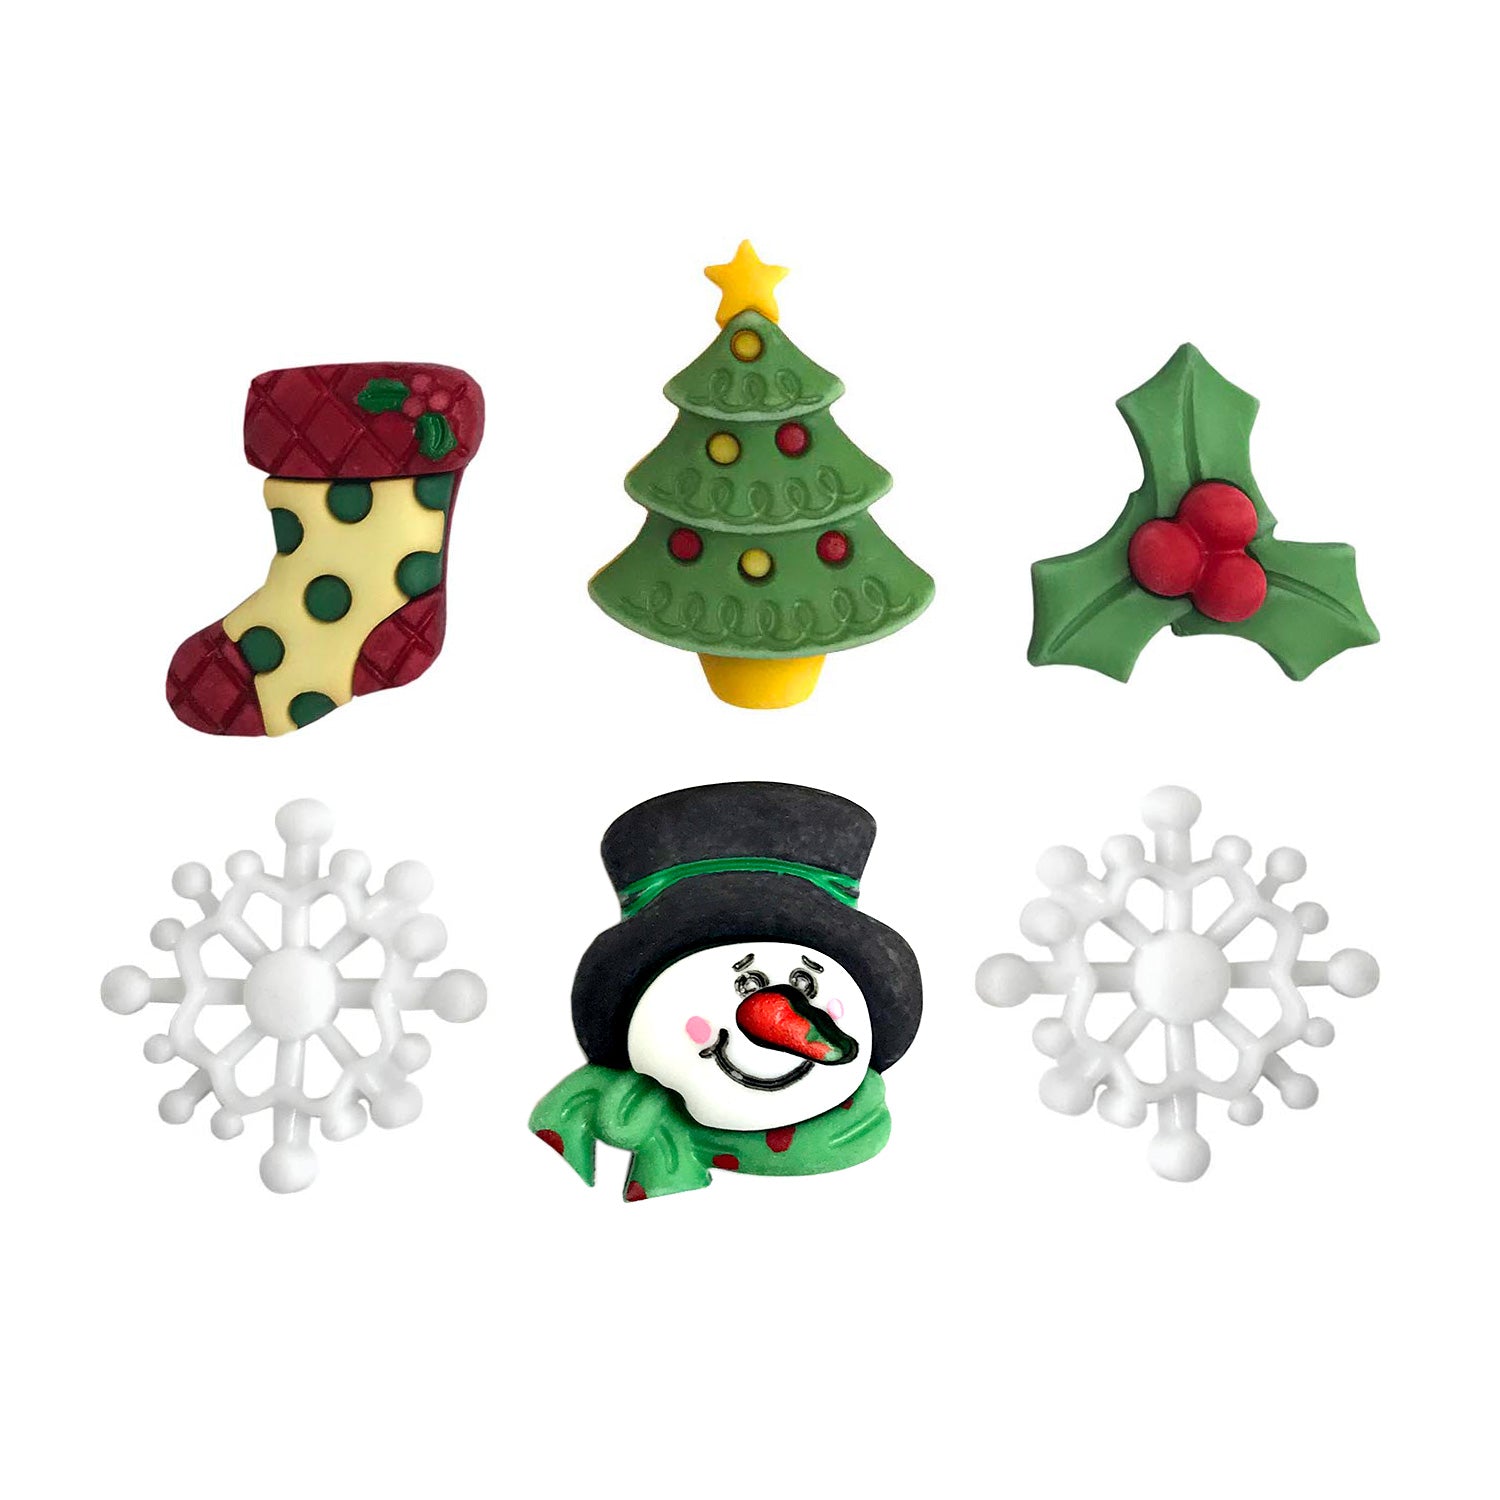 Holiday Fun Group - Buttons Galore and More